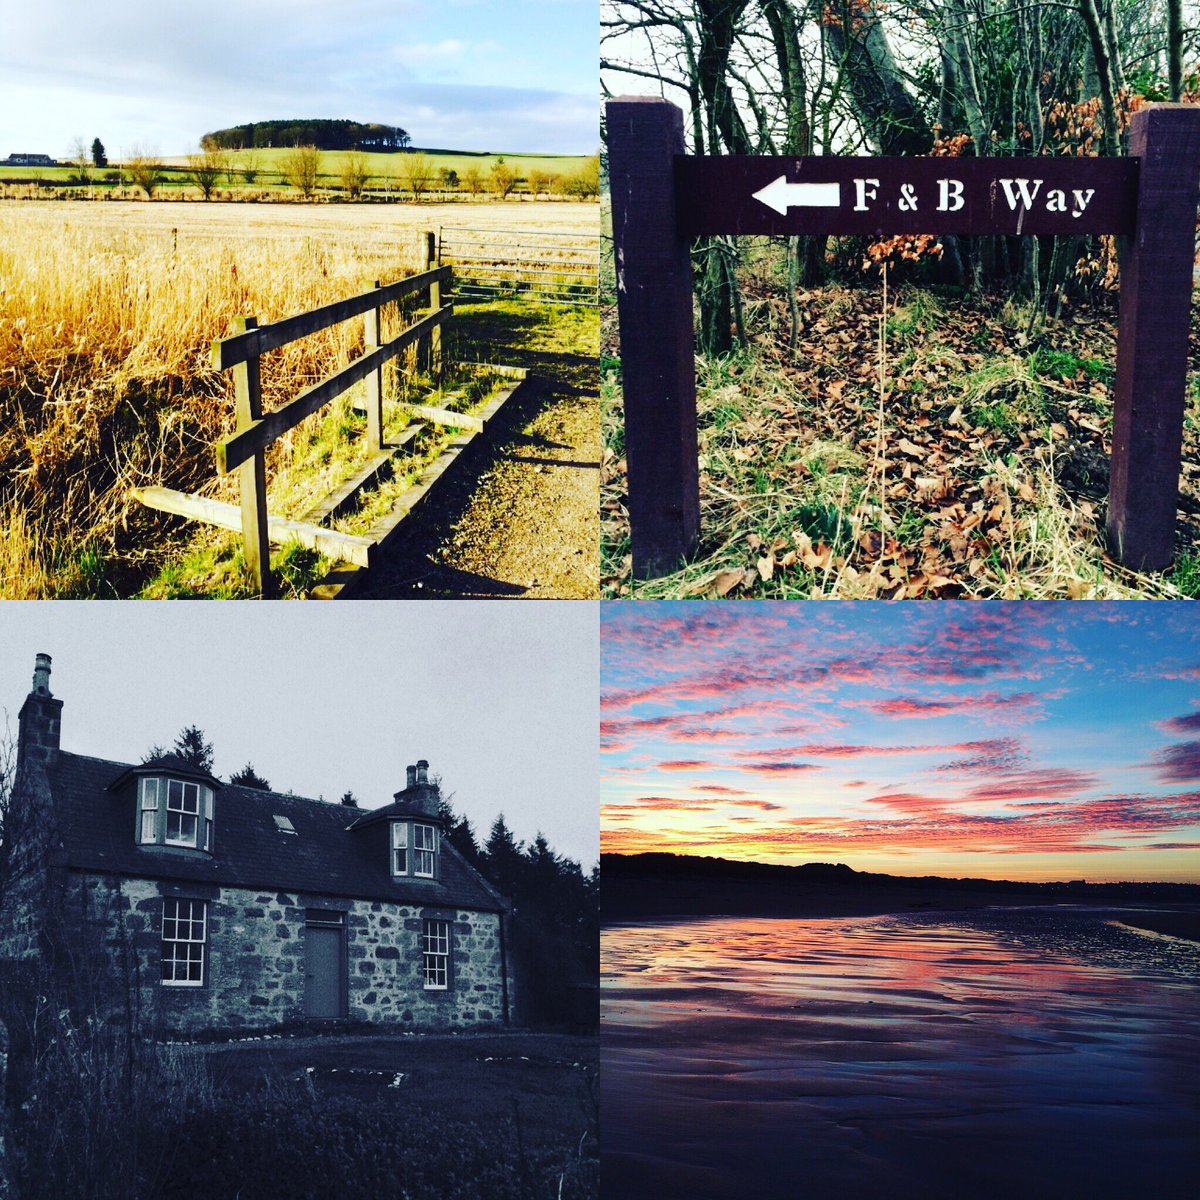 Thinking of spending the Easter holidays in the shire? #loveaberdeenshire @BestOfOurShire